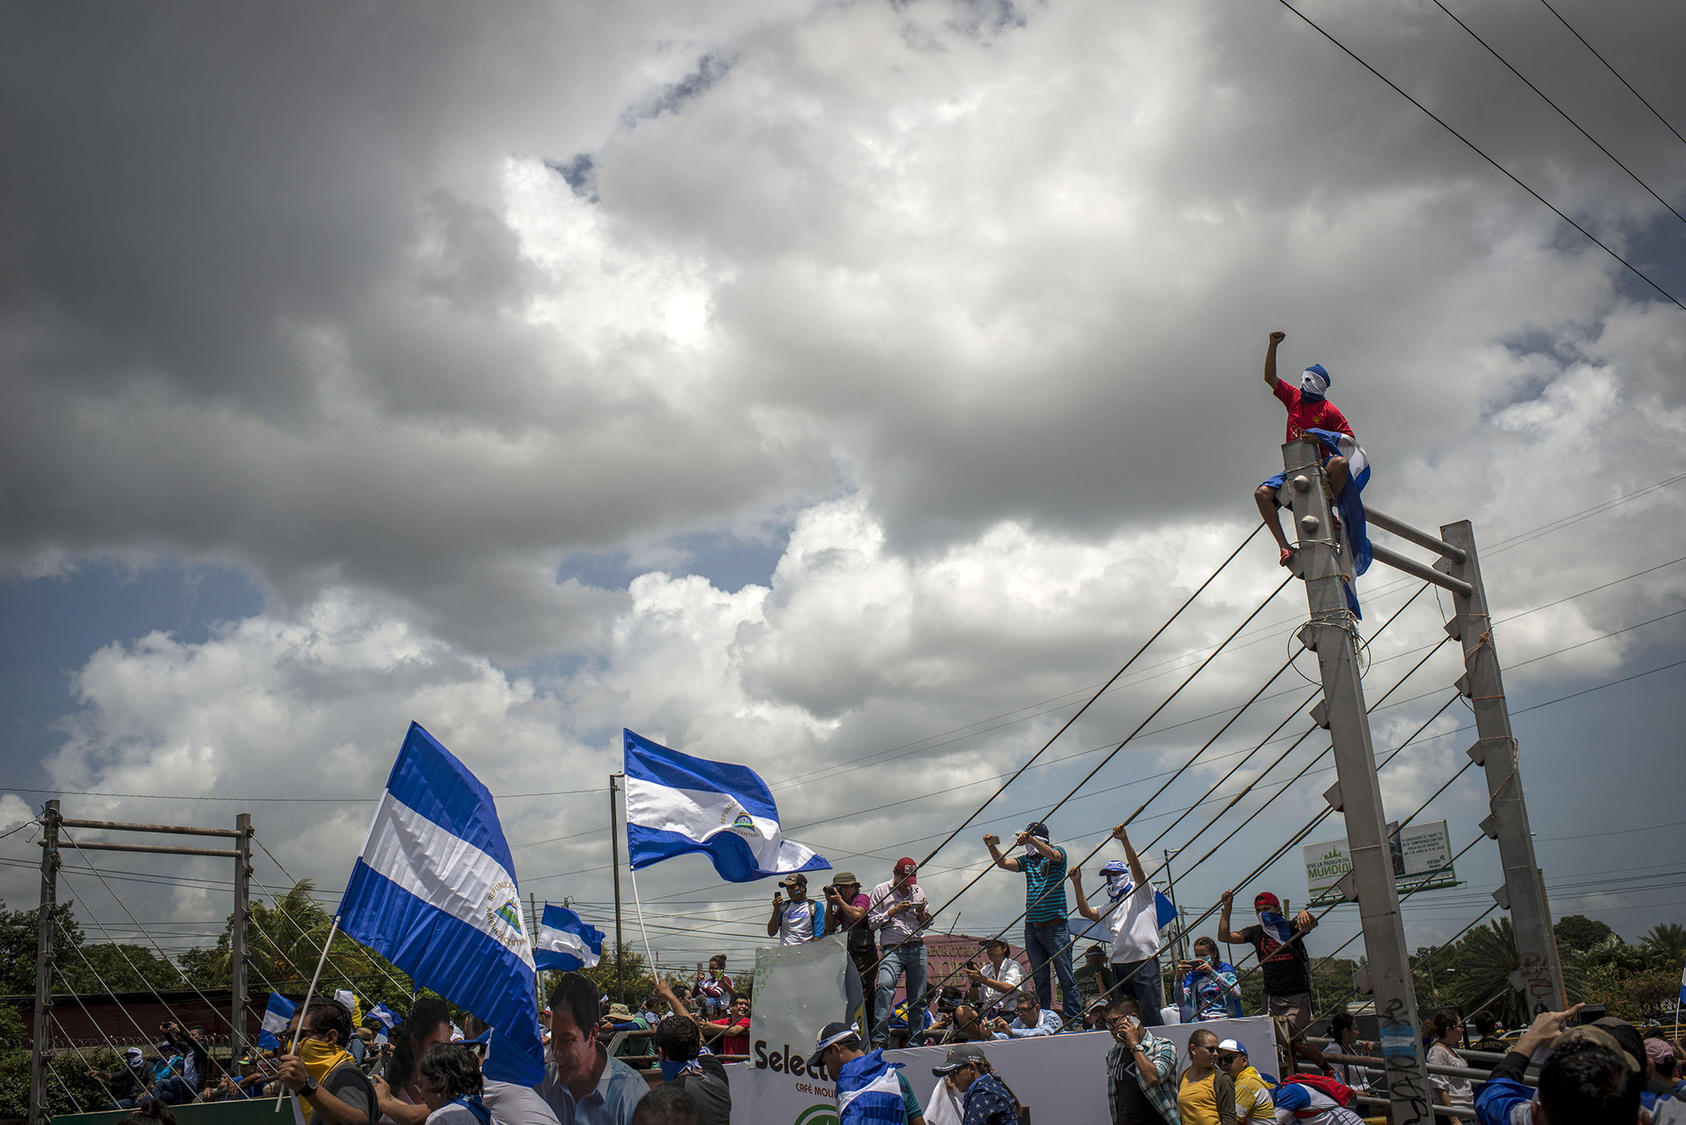 A rally to support the Roman Catholic Church, which has been accused of supporting the opposition to President Daniel Ortega, in Managua, Nicaragua, July 28, 2018. (Daniele Volpe/The New York Times)